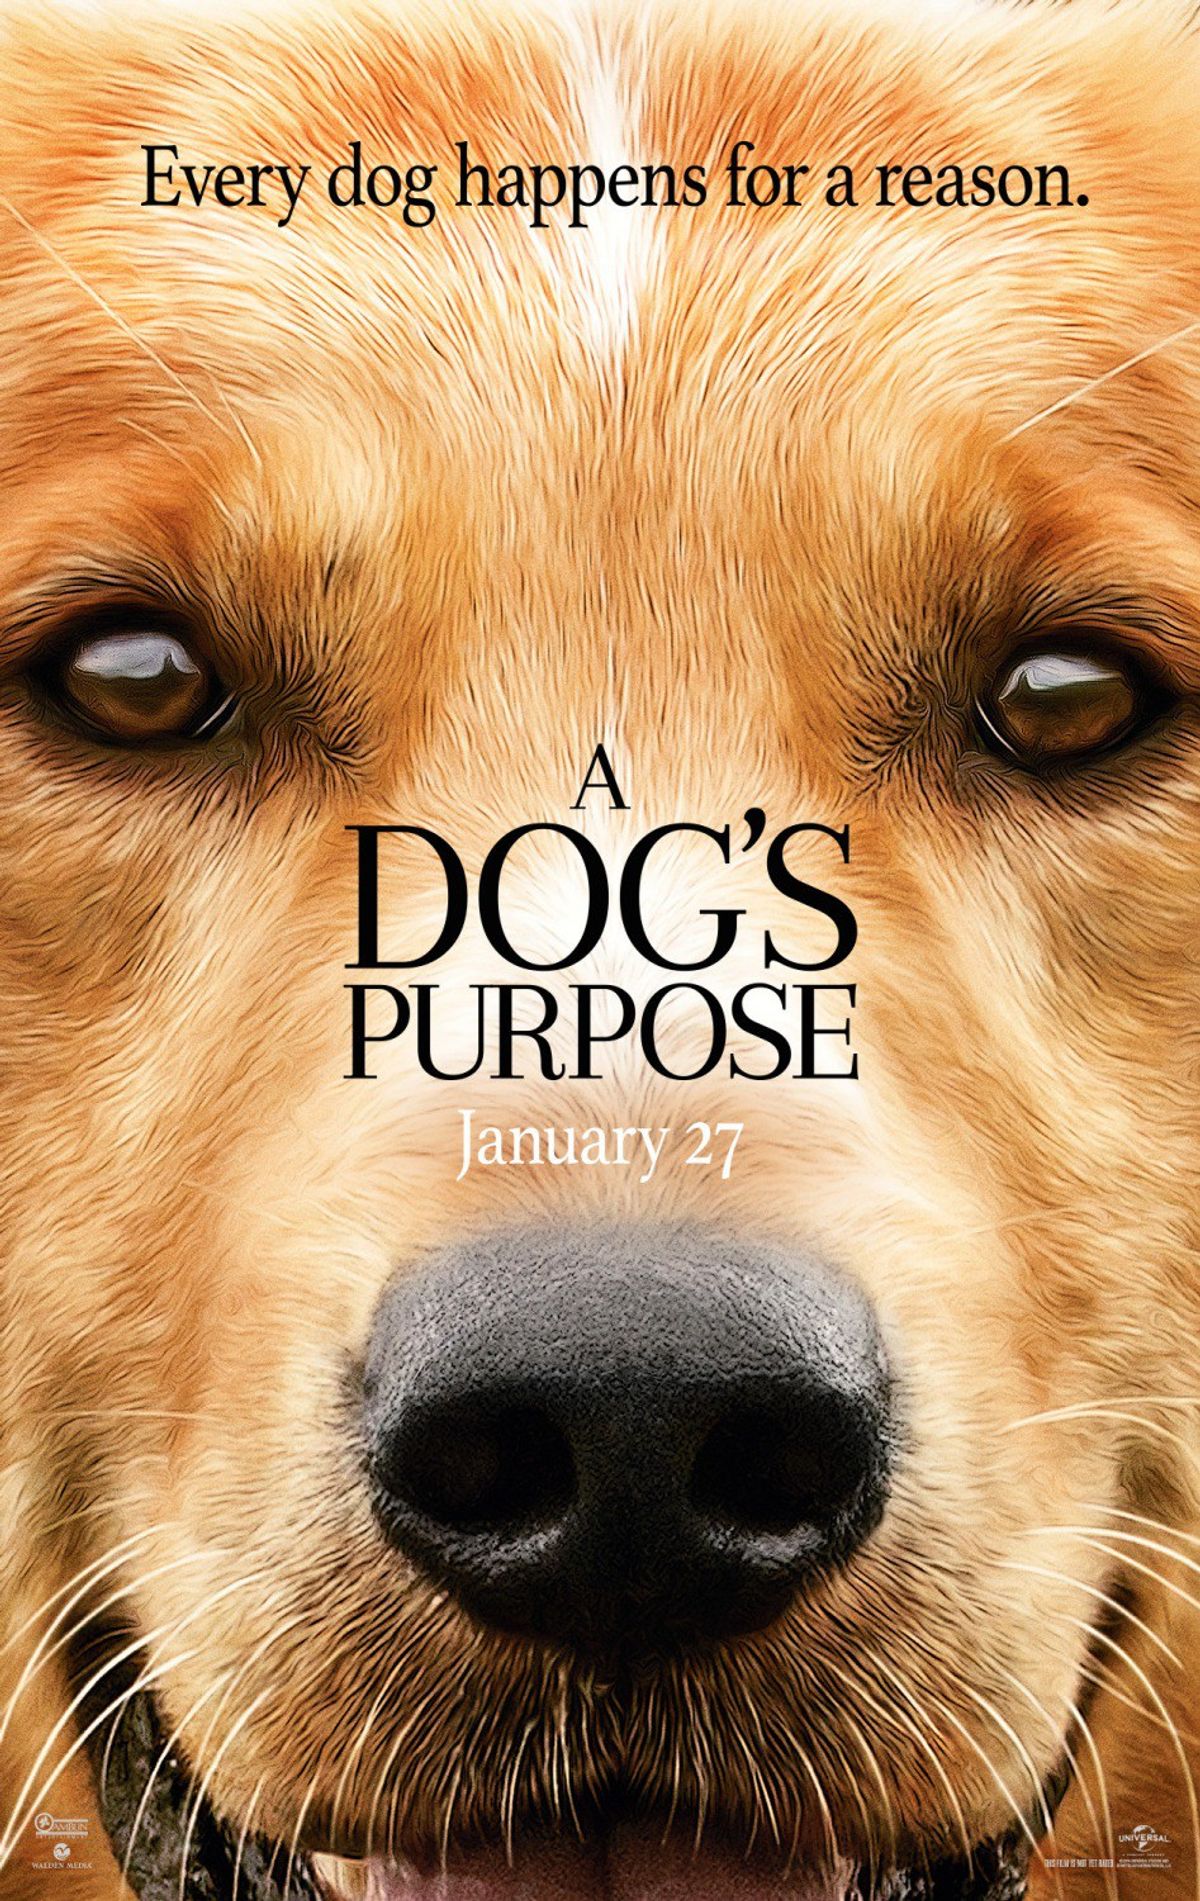 Why You Can Still Go See A Dog's Purpose